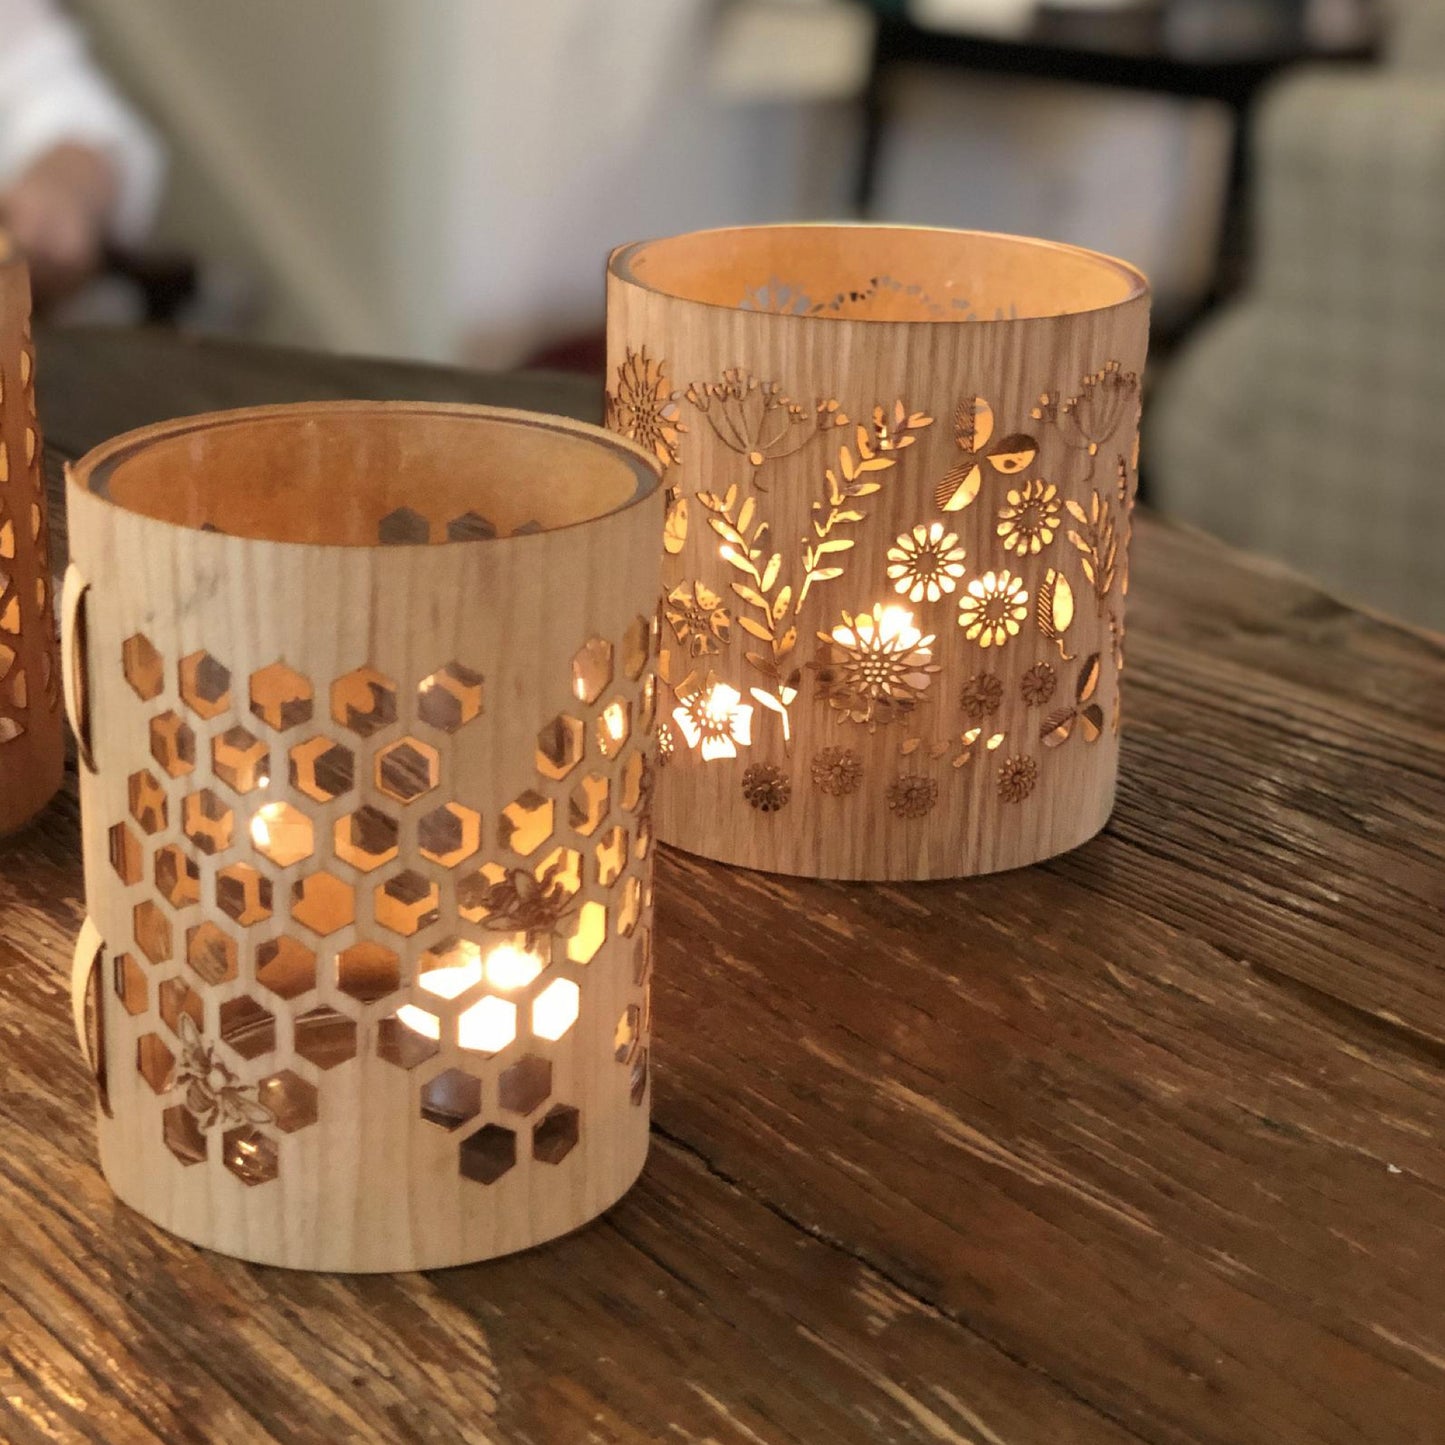 Extra cozy (No Glass) -Floral  detail -  Natural wood cover - For those who already have one of my lanterns (lanterncozies)